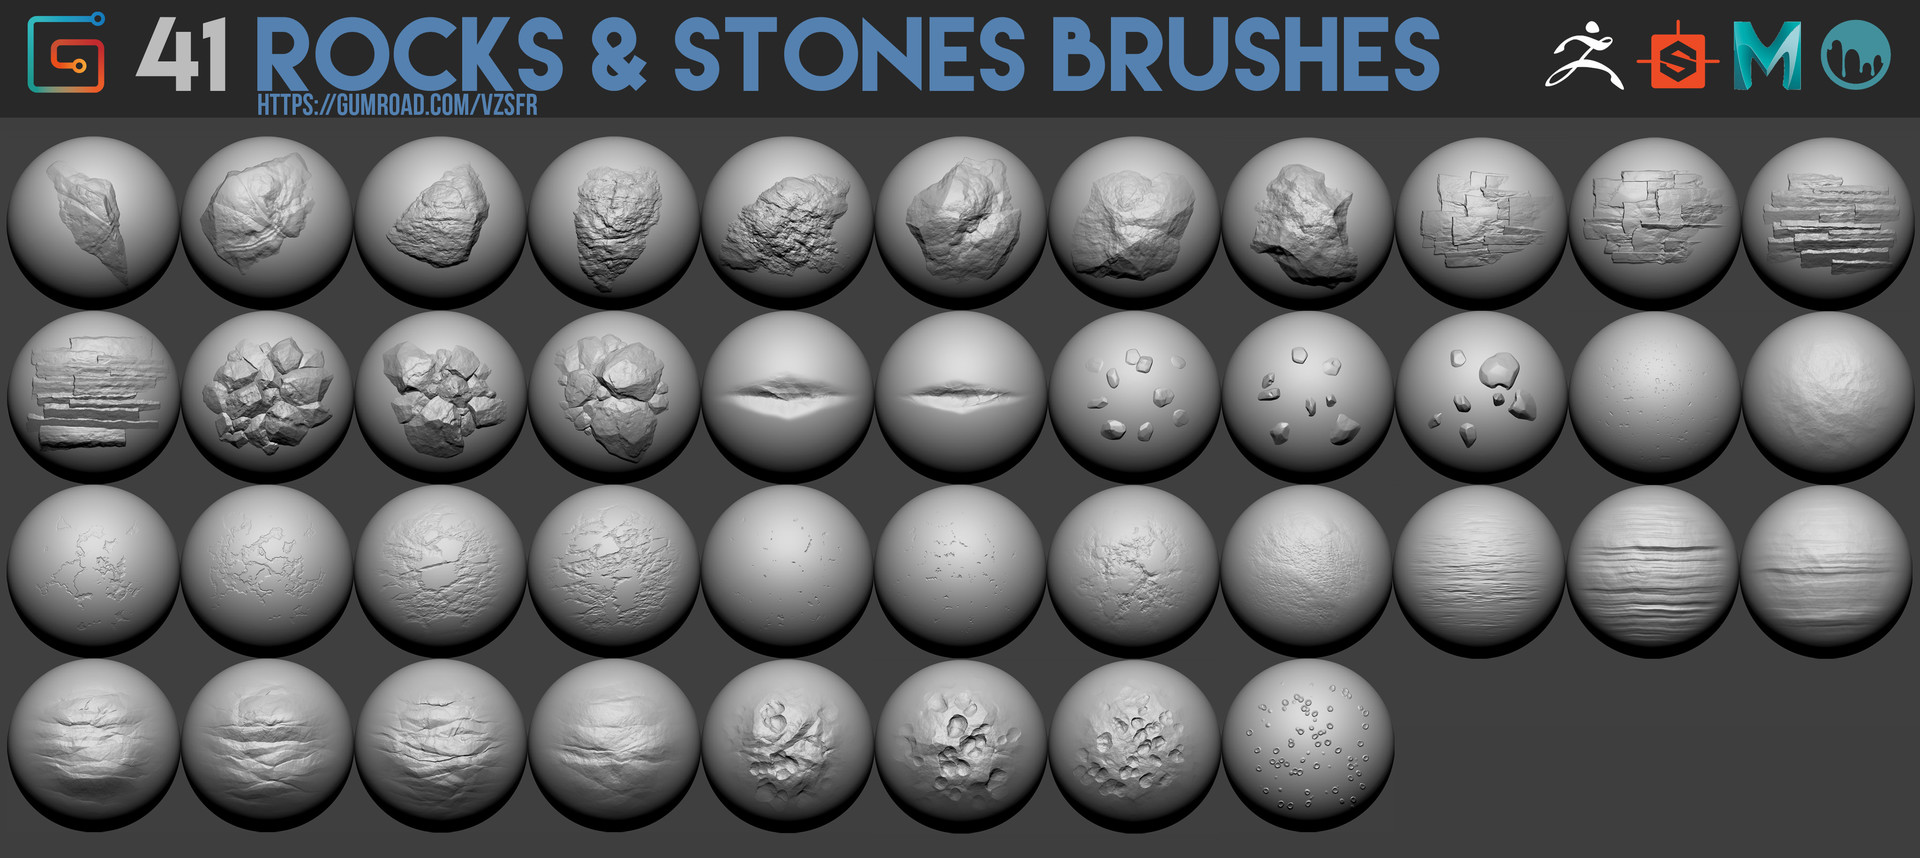 gumroad zbrush 200+ alphas block out hard surface